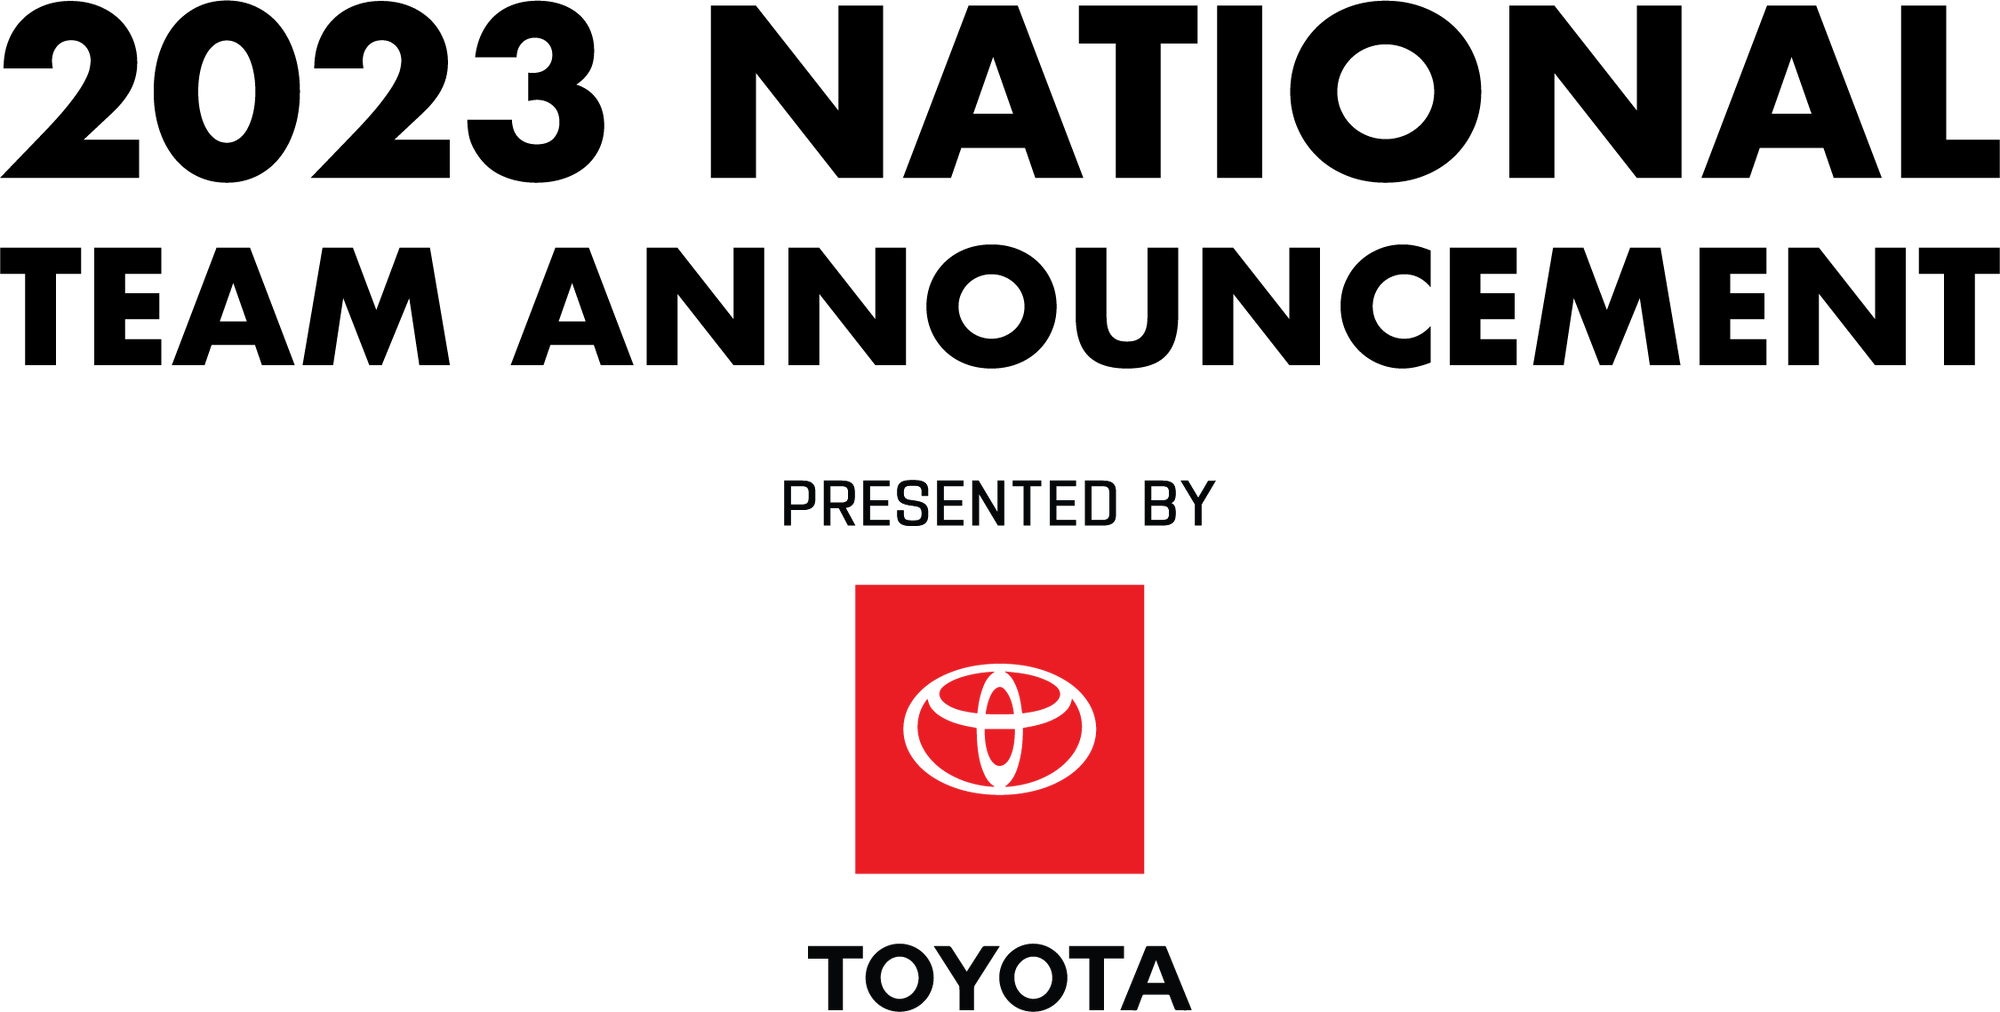 2023 NATIONAL TEAM ANNOUNCEMENT PRESENTED BY TOYOTA